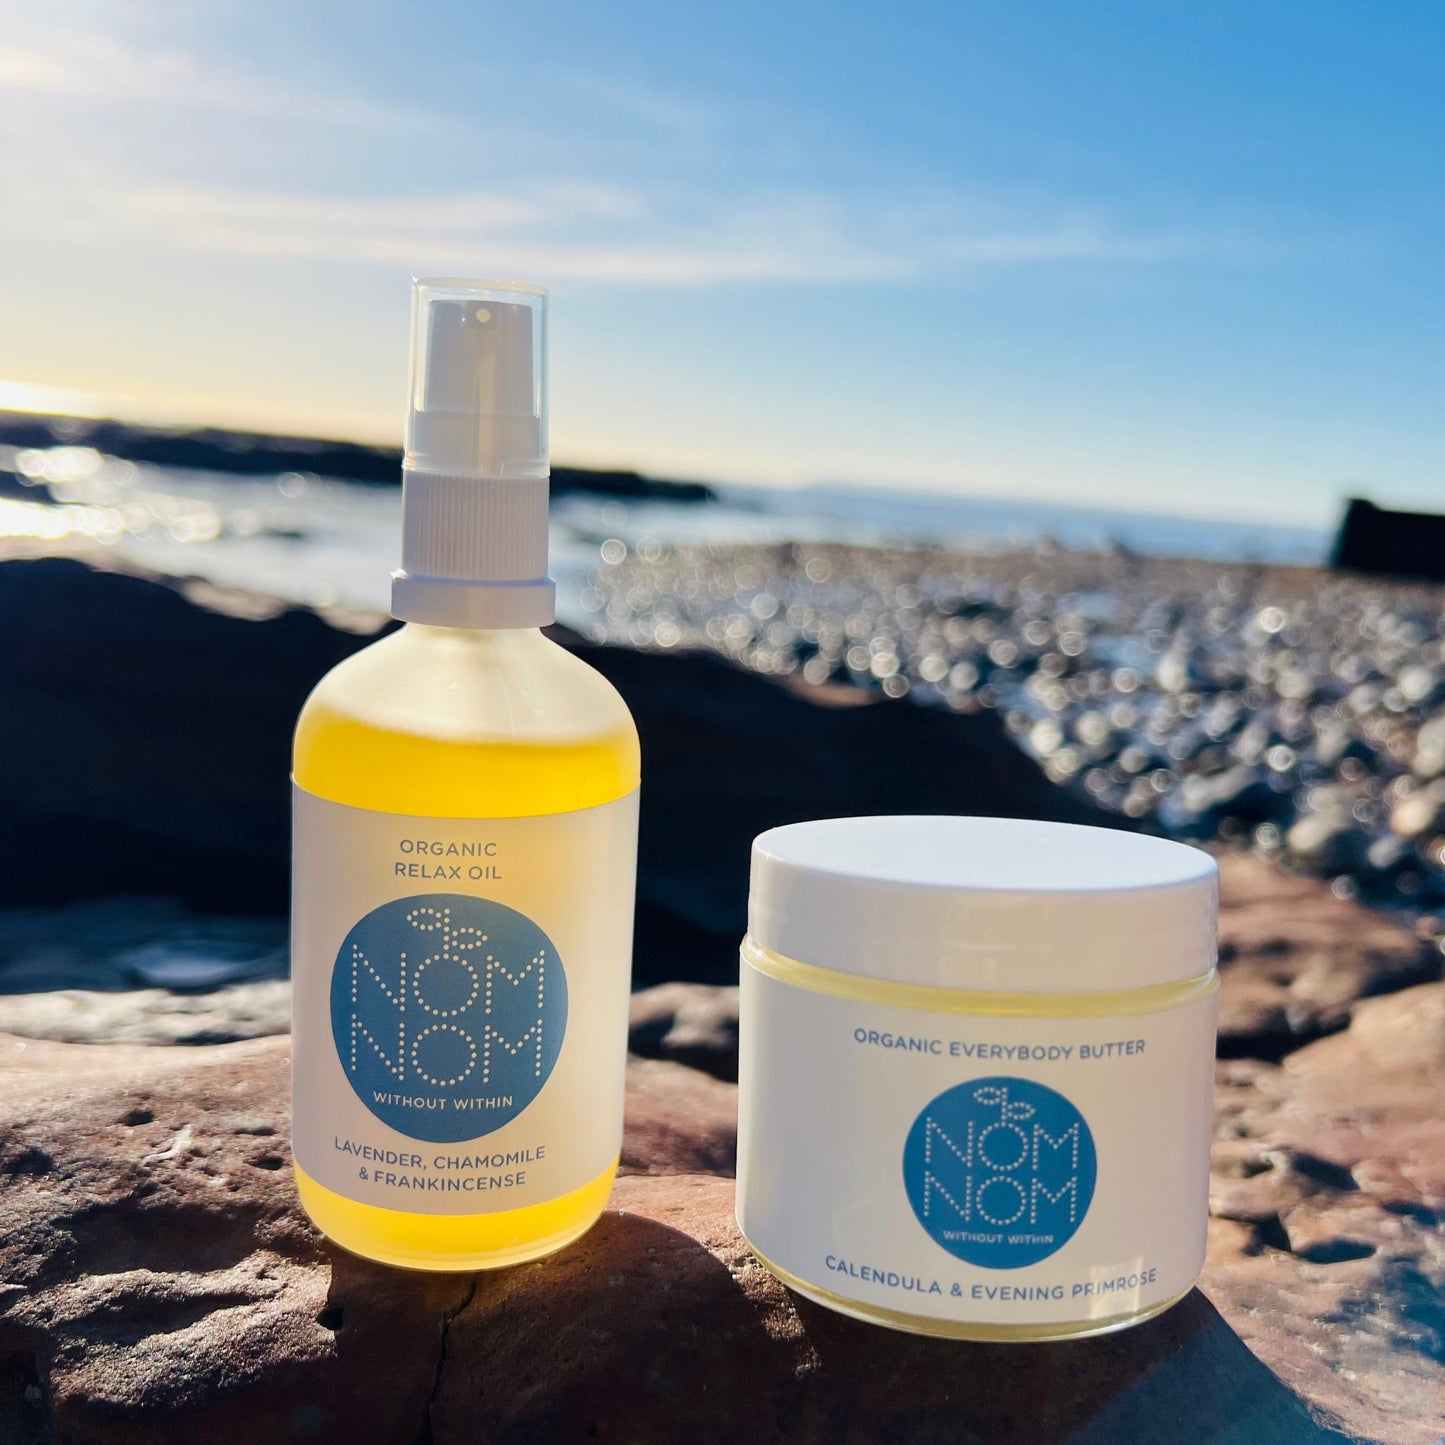 photo of nom nom skincare organic body oil and body butter sitting on the edge of a rock pool. the background is blurred but you can make out a pebble beach and the sea in the background as the products sit in the evening sun